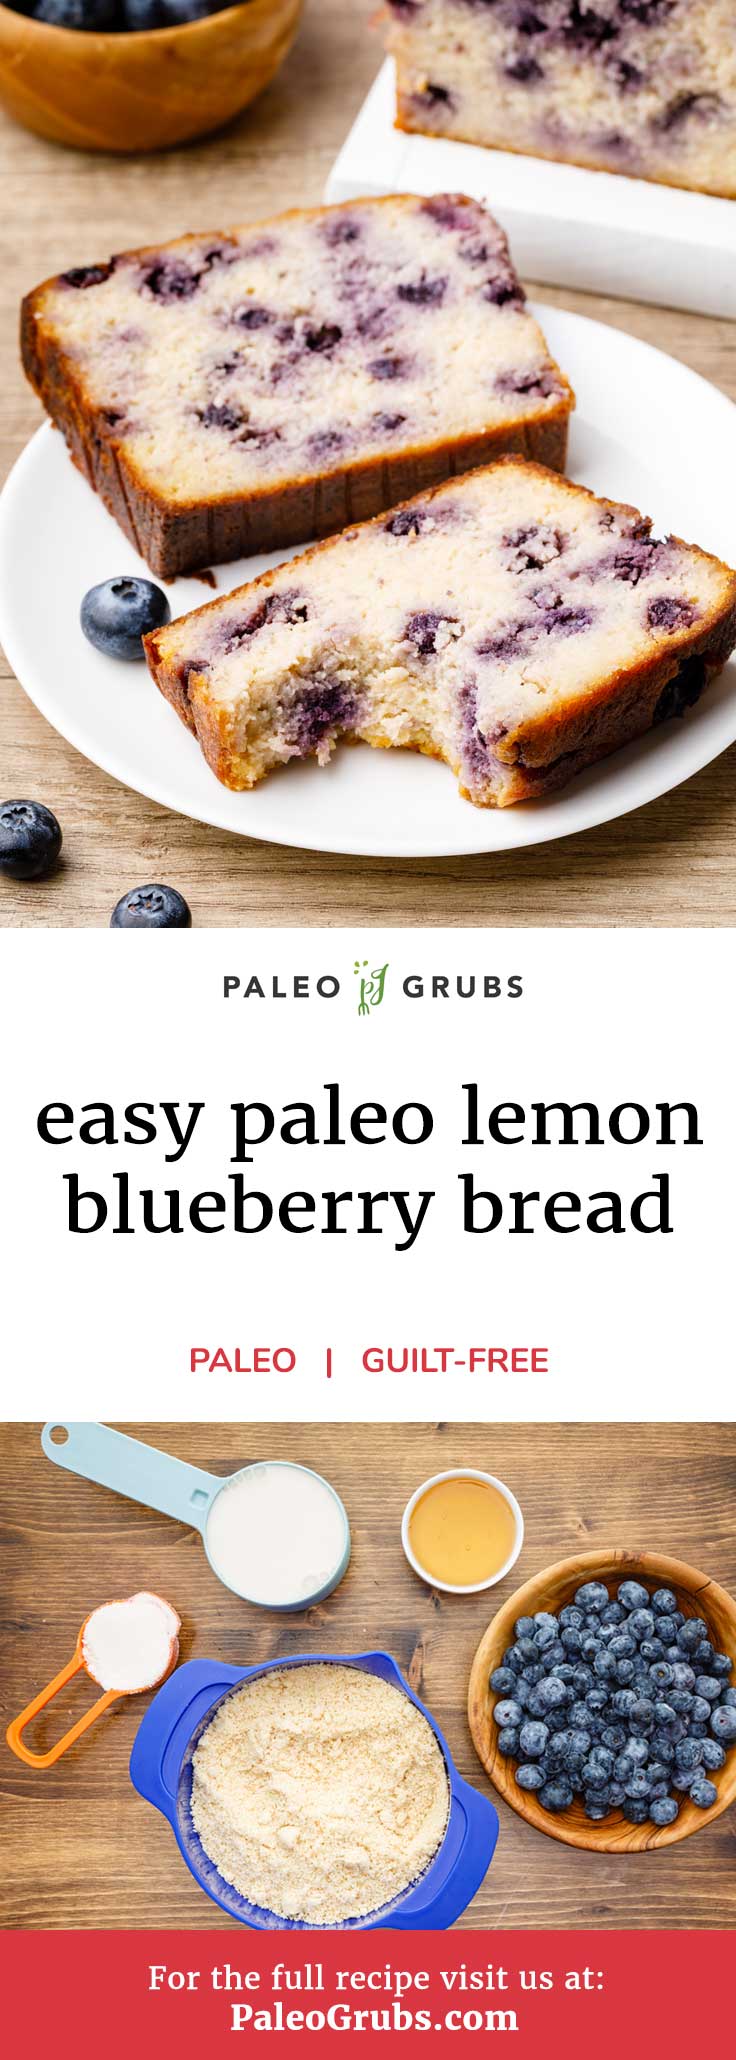 Think you can’t enjoy a delicious loaf of warm freshly baked bread while following a paleo diet? Think again as this paleo blueberry bread recipe is an absolute must try. Passing on using refined flours and yeast in favor of all-natural ingredients like almond flour, coconut flour, and honey, this recipe will become a household staple in no time. Just make sure to make enough for the whole family.